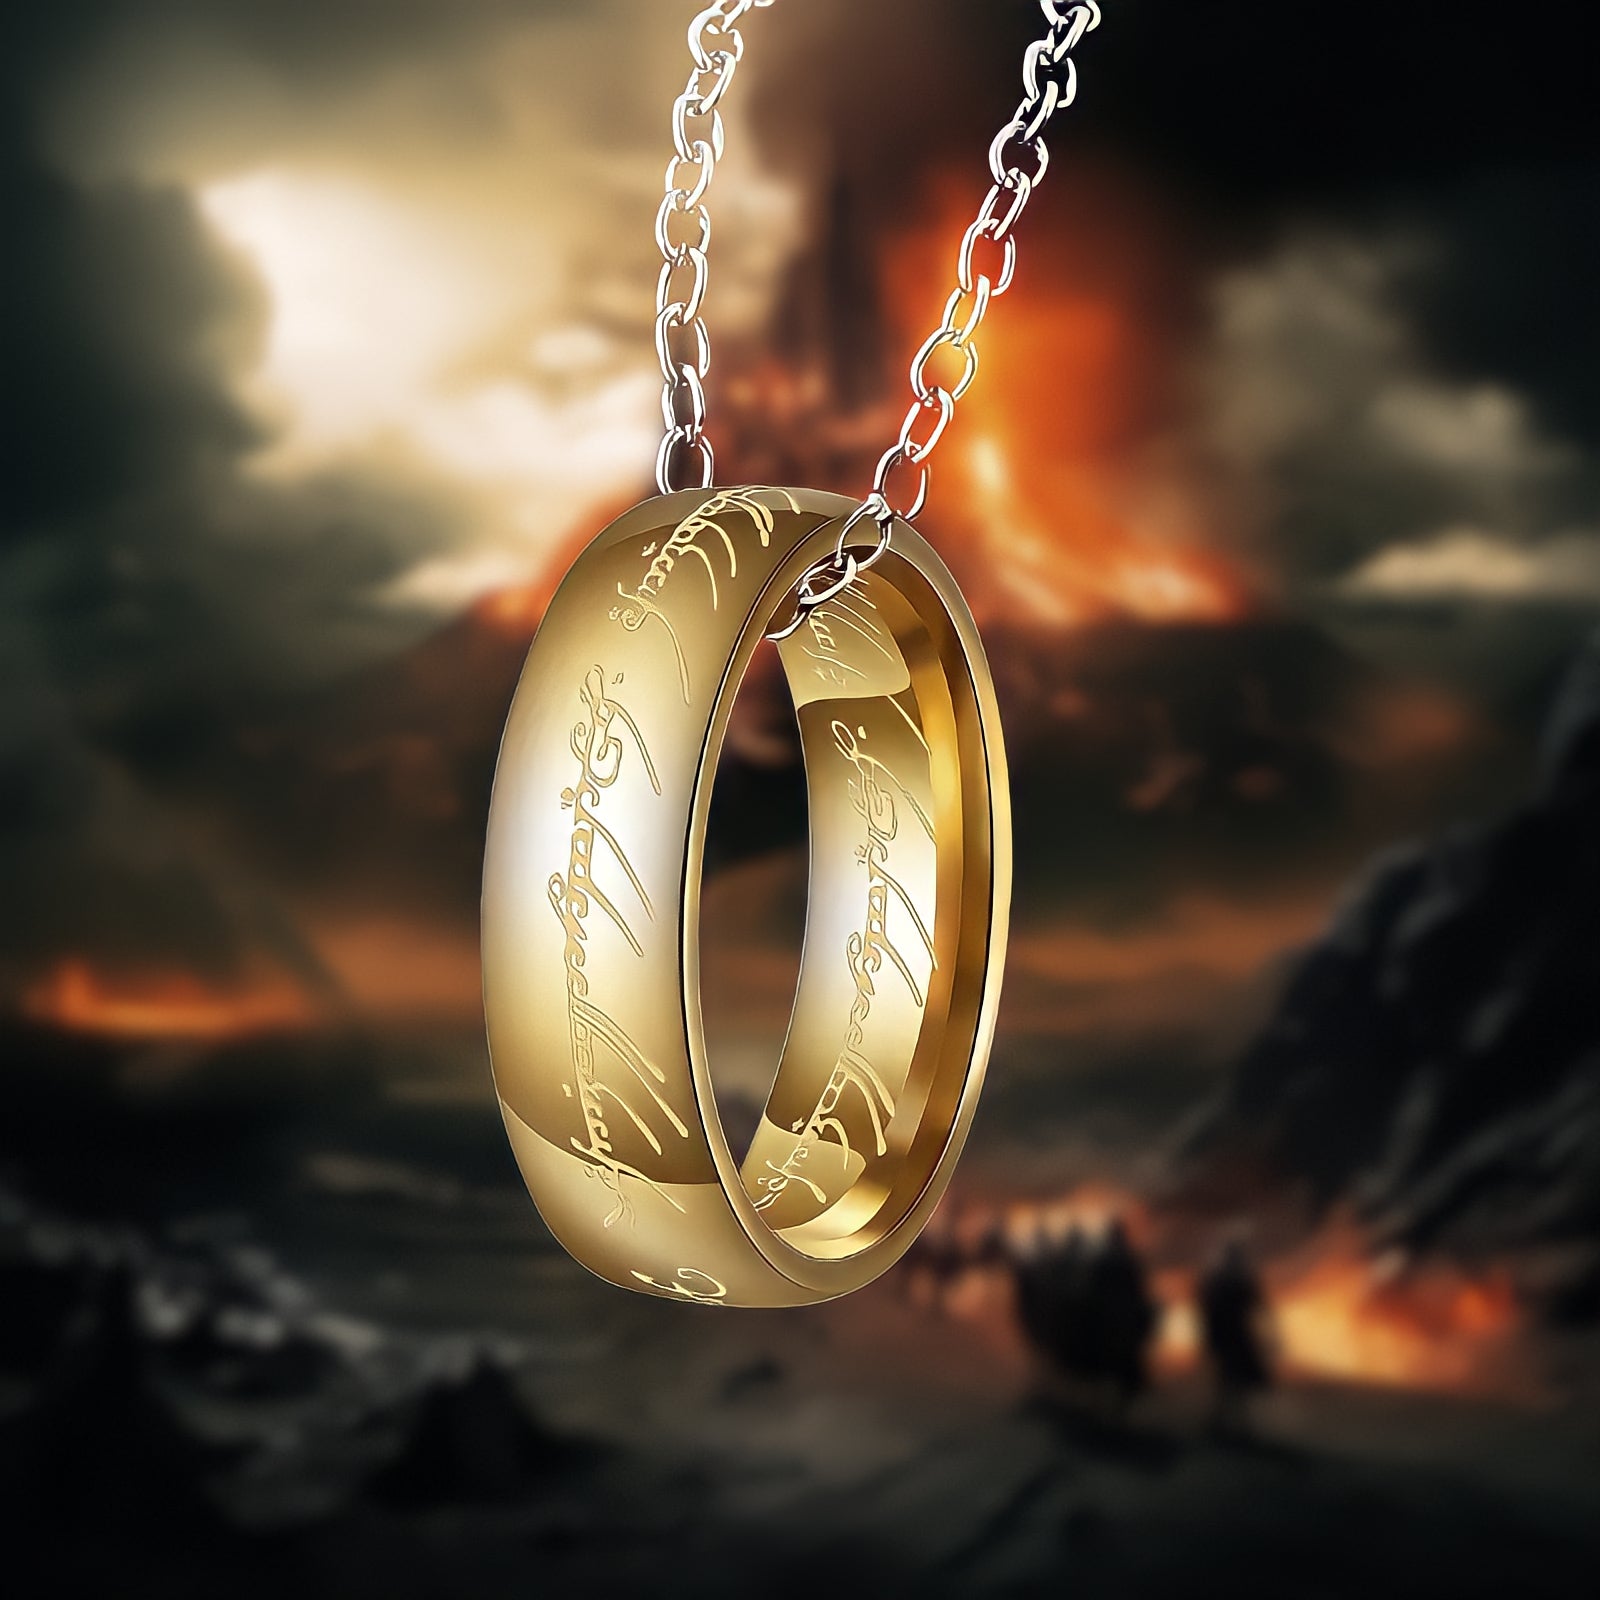 The One Ring Necklace